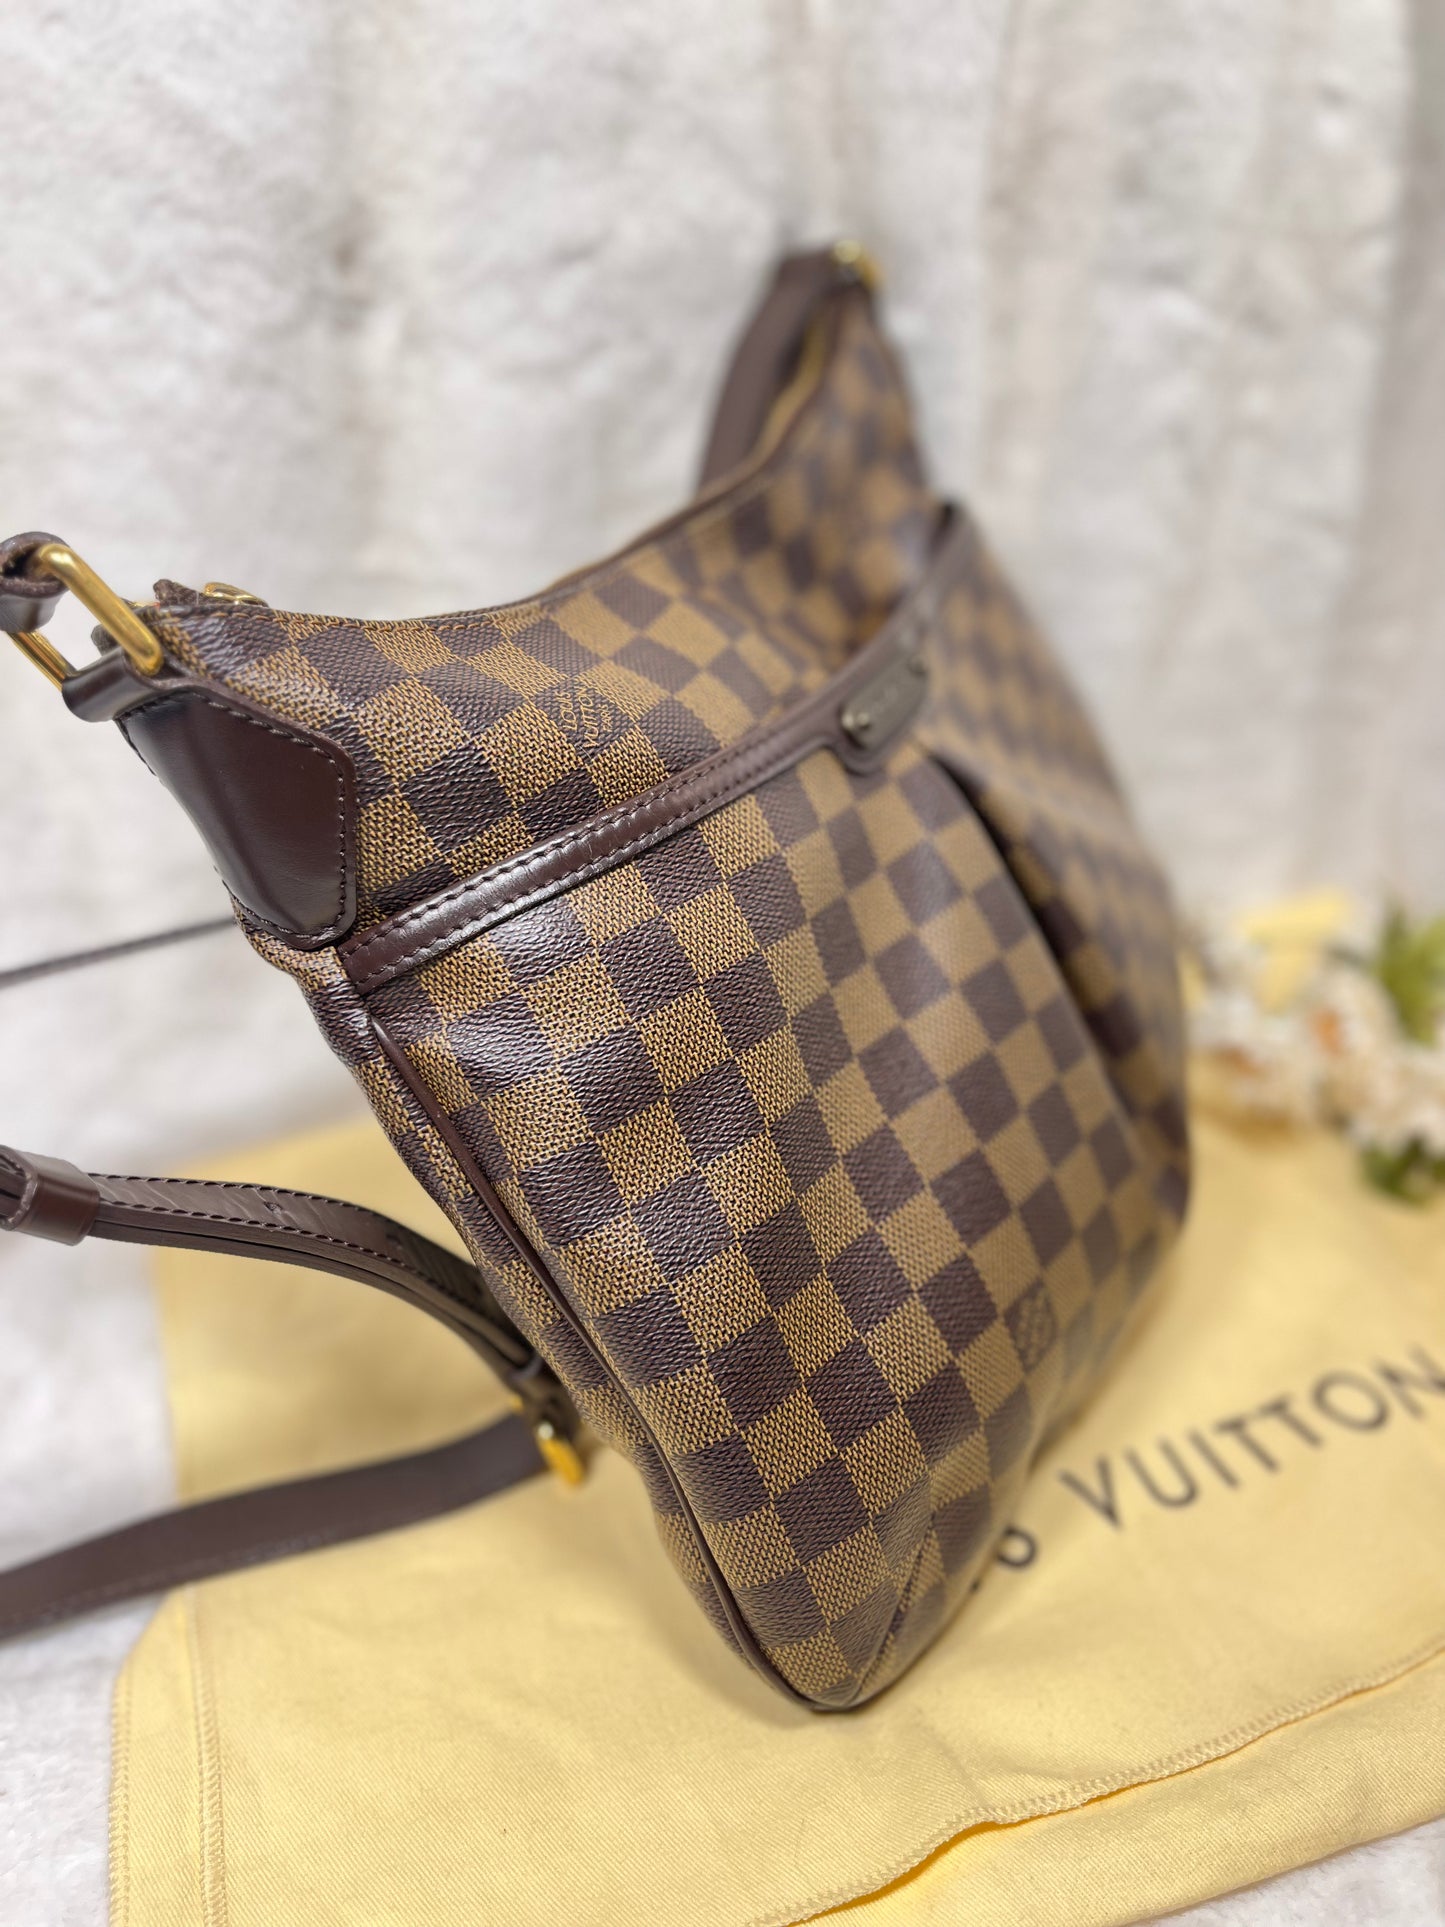 Authentic pre-owned Louis Vuitton Bloomsbury pm crossbody shoulder bag